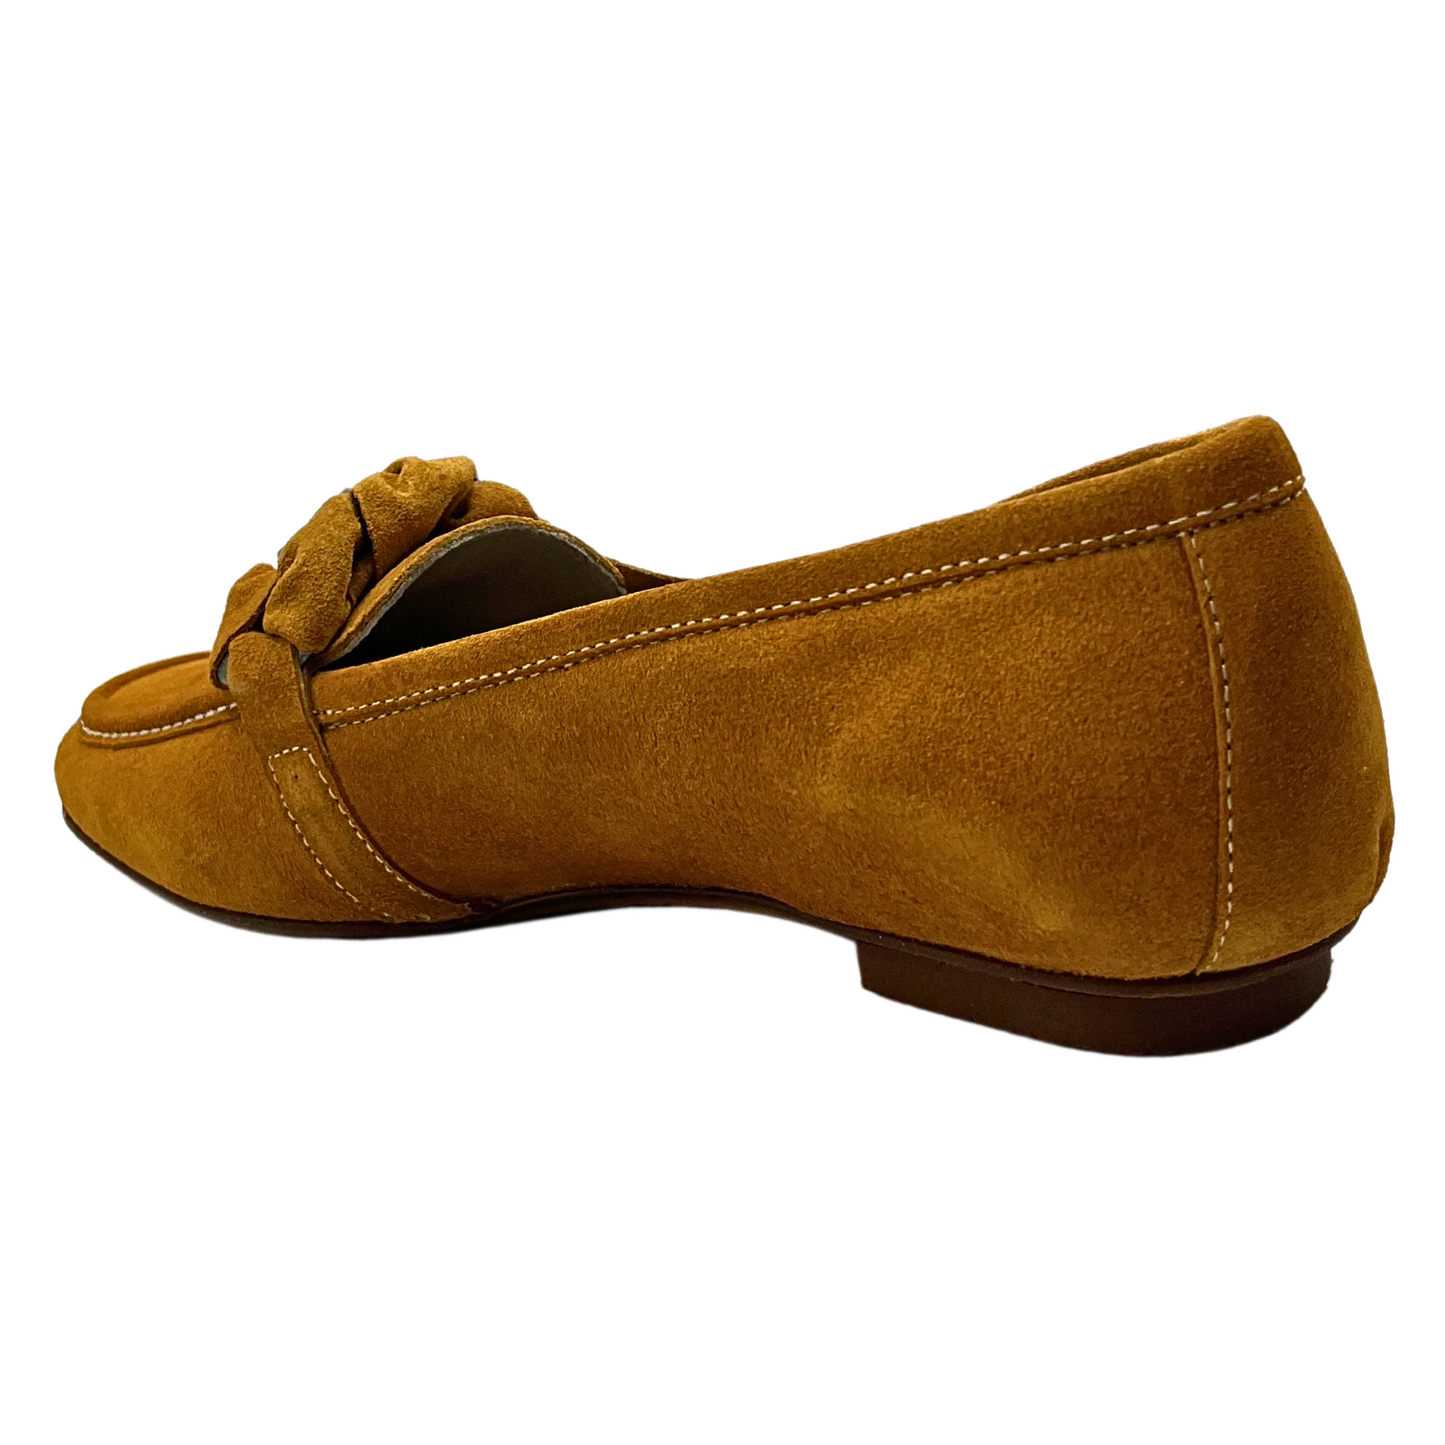 Angled rear view of a slip on loafer in a mustard suede.